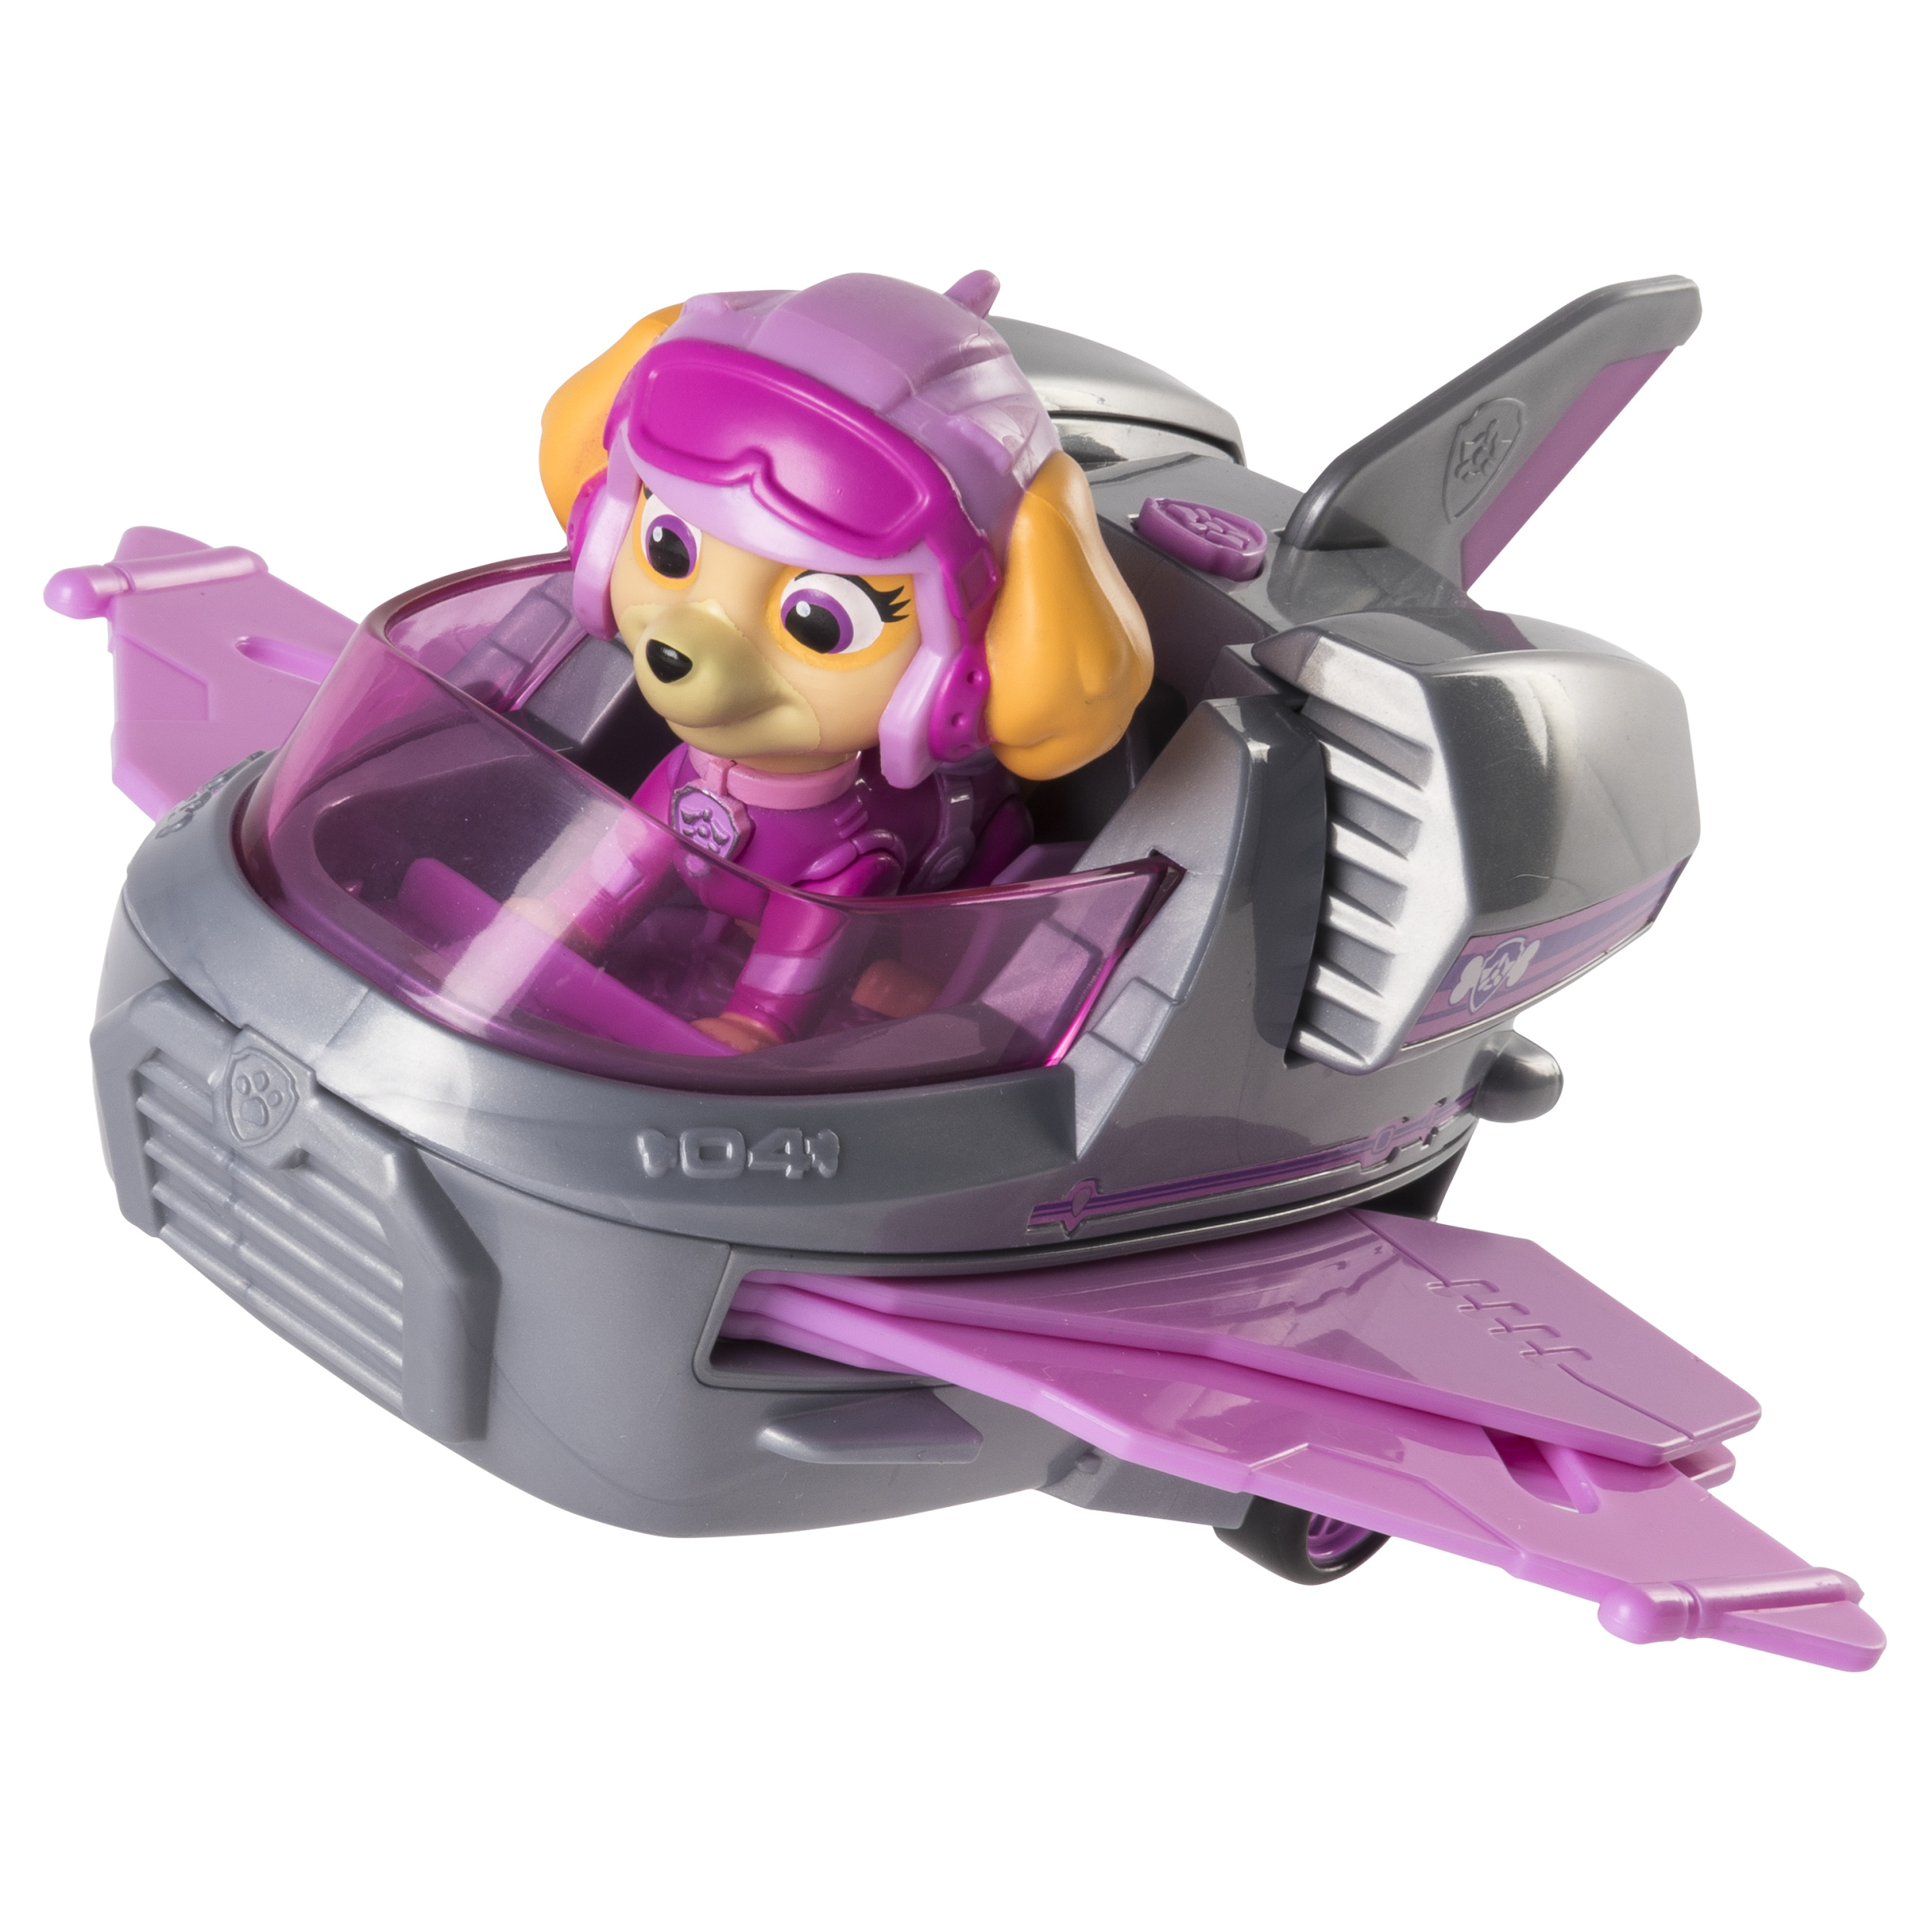 PAW Patrol Skye’s Rescue Jet with Extendable Wings Play Vehicle - image 2 of 5